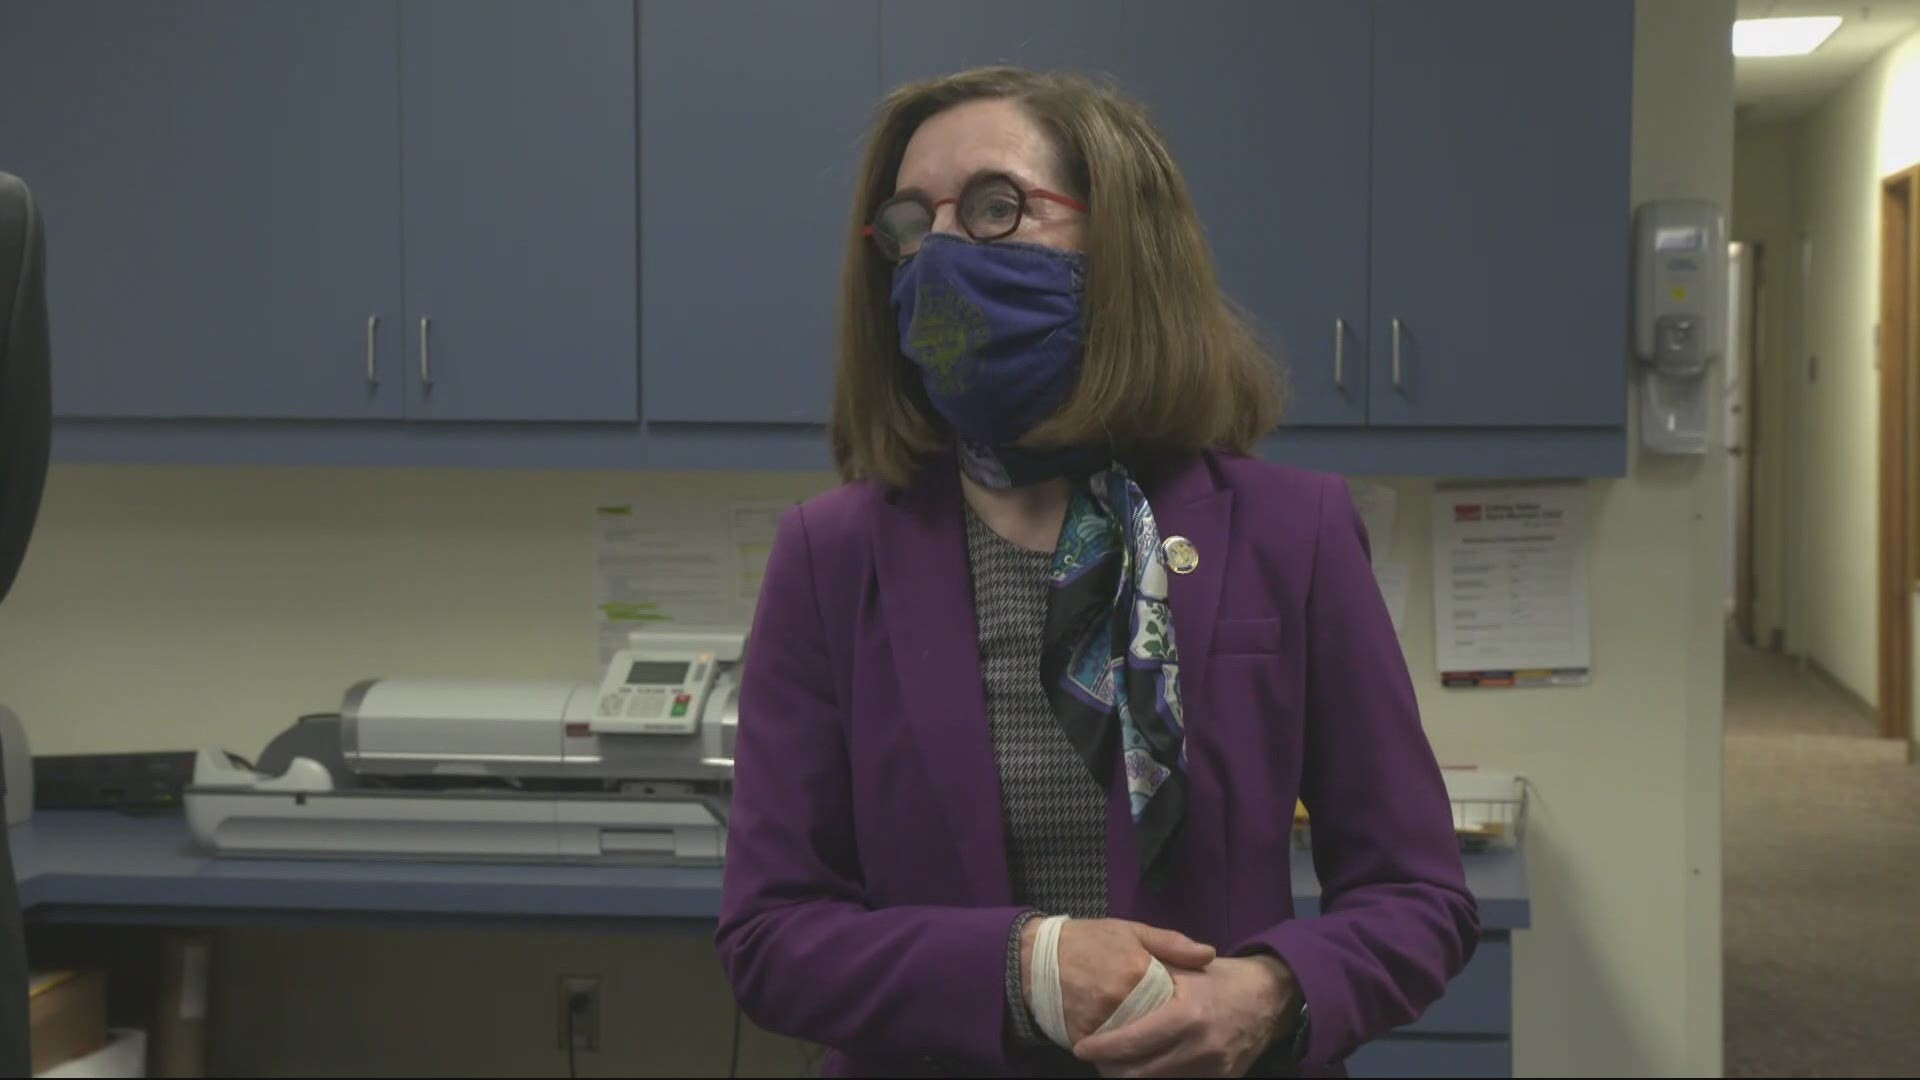 Gov. Kate Brown said she's grateful to have gotten the Johnson & Johnson vaccine, and added that the pause will not significantly impact Oregon vaccination efforts.